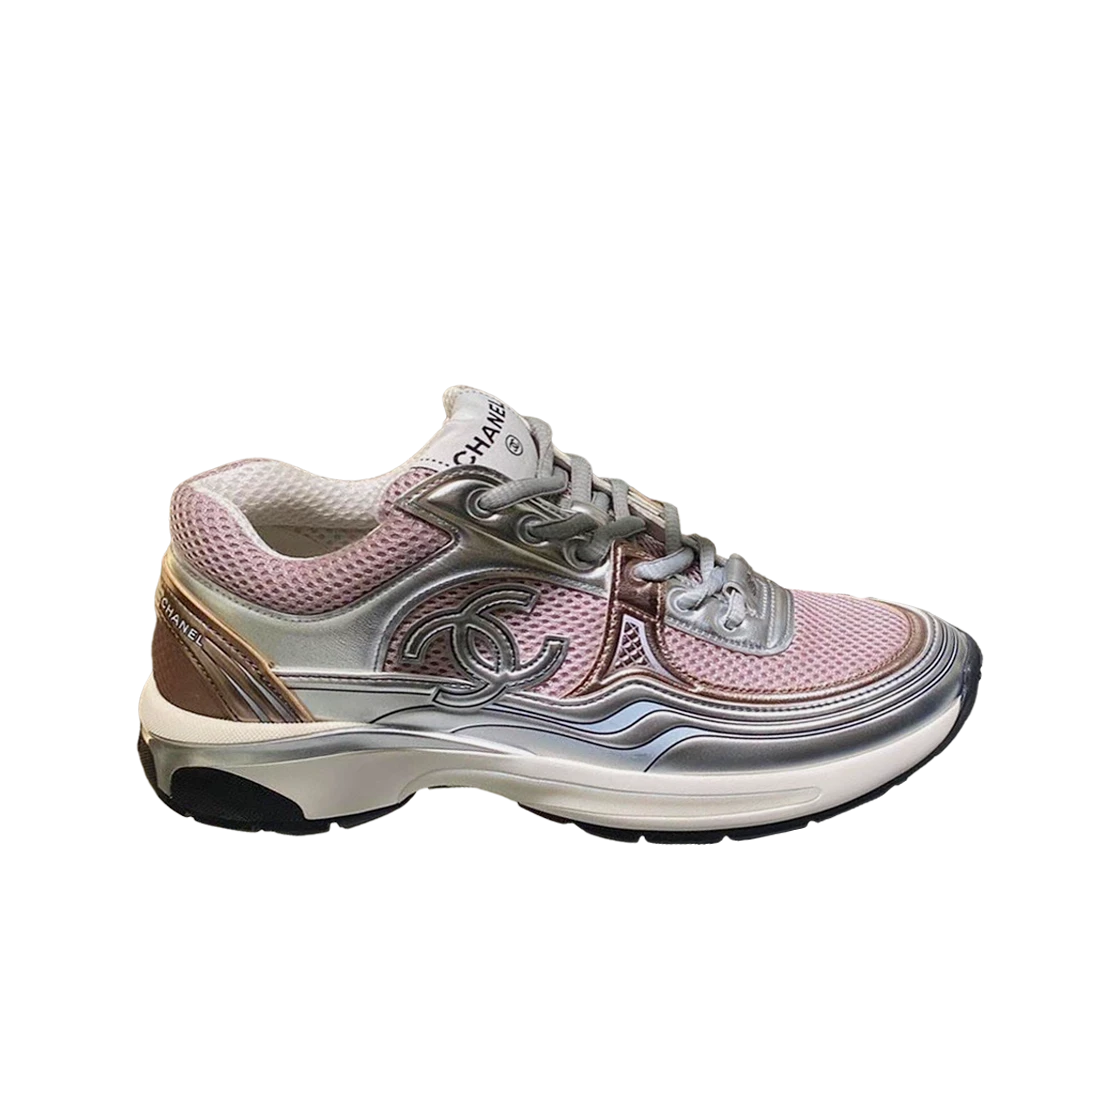 SASOM  shoes (W) Chanel Sneakers Fabric Laminated & Pink Silver Check the  latest price now!